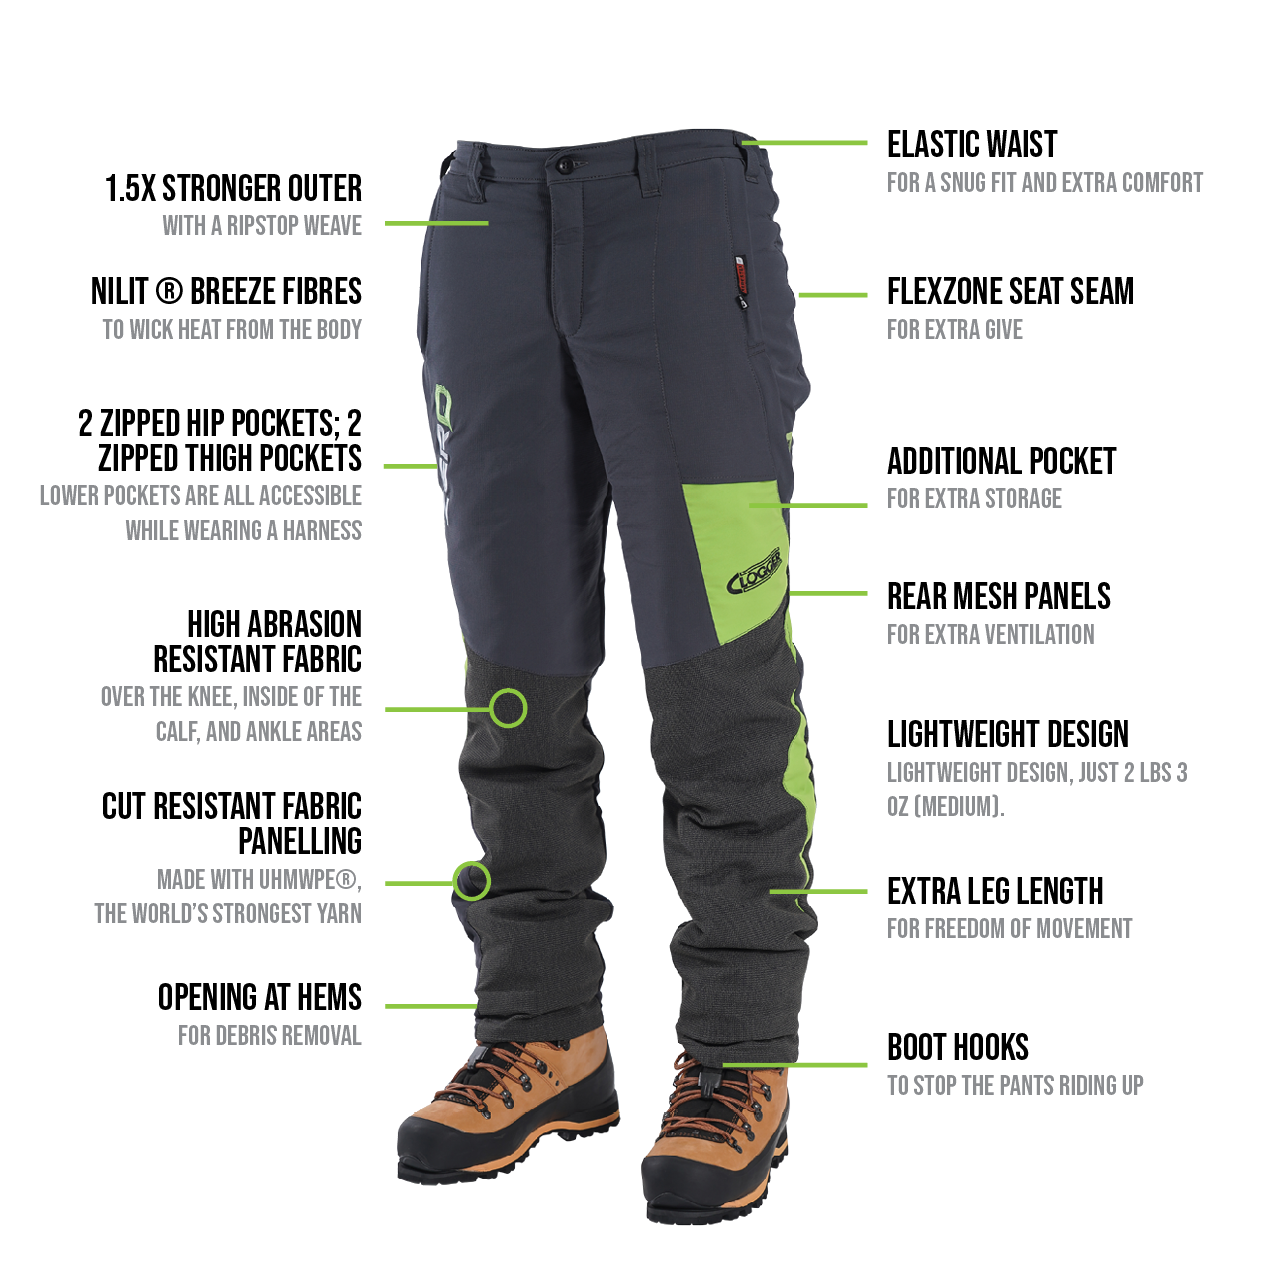 Clogger Zero Chainsaw Pants Gen 2 features and specifications. Why these chainsaw pants are miles ahead of standard chainsaw chaps